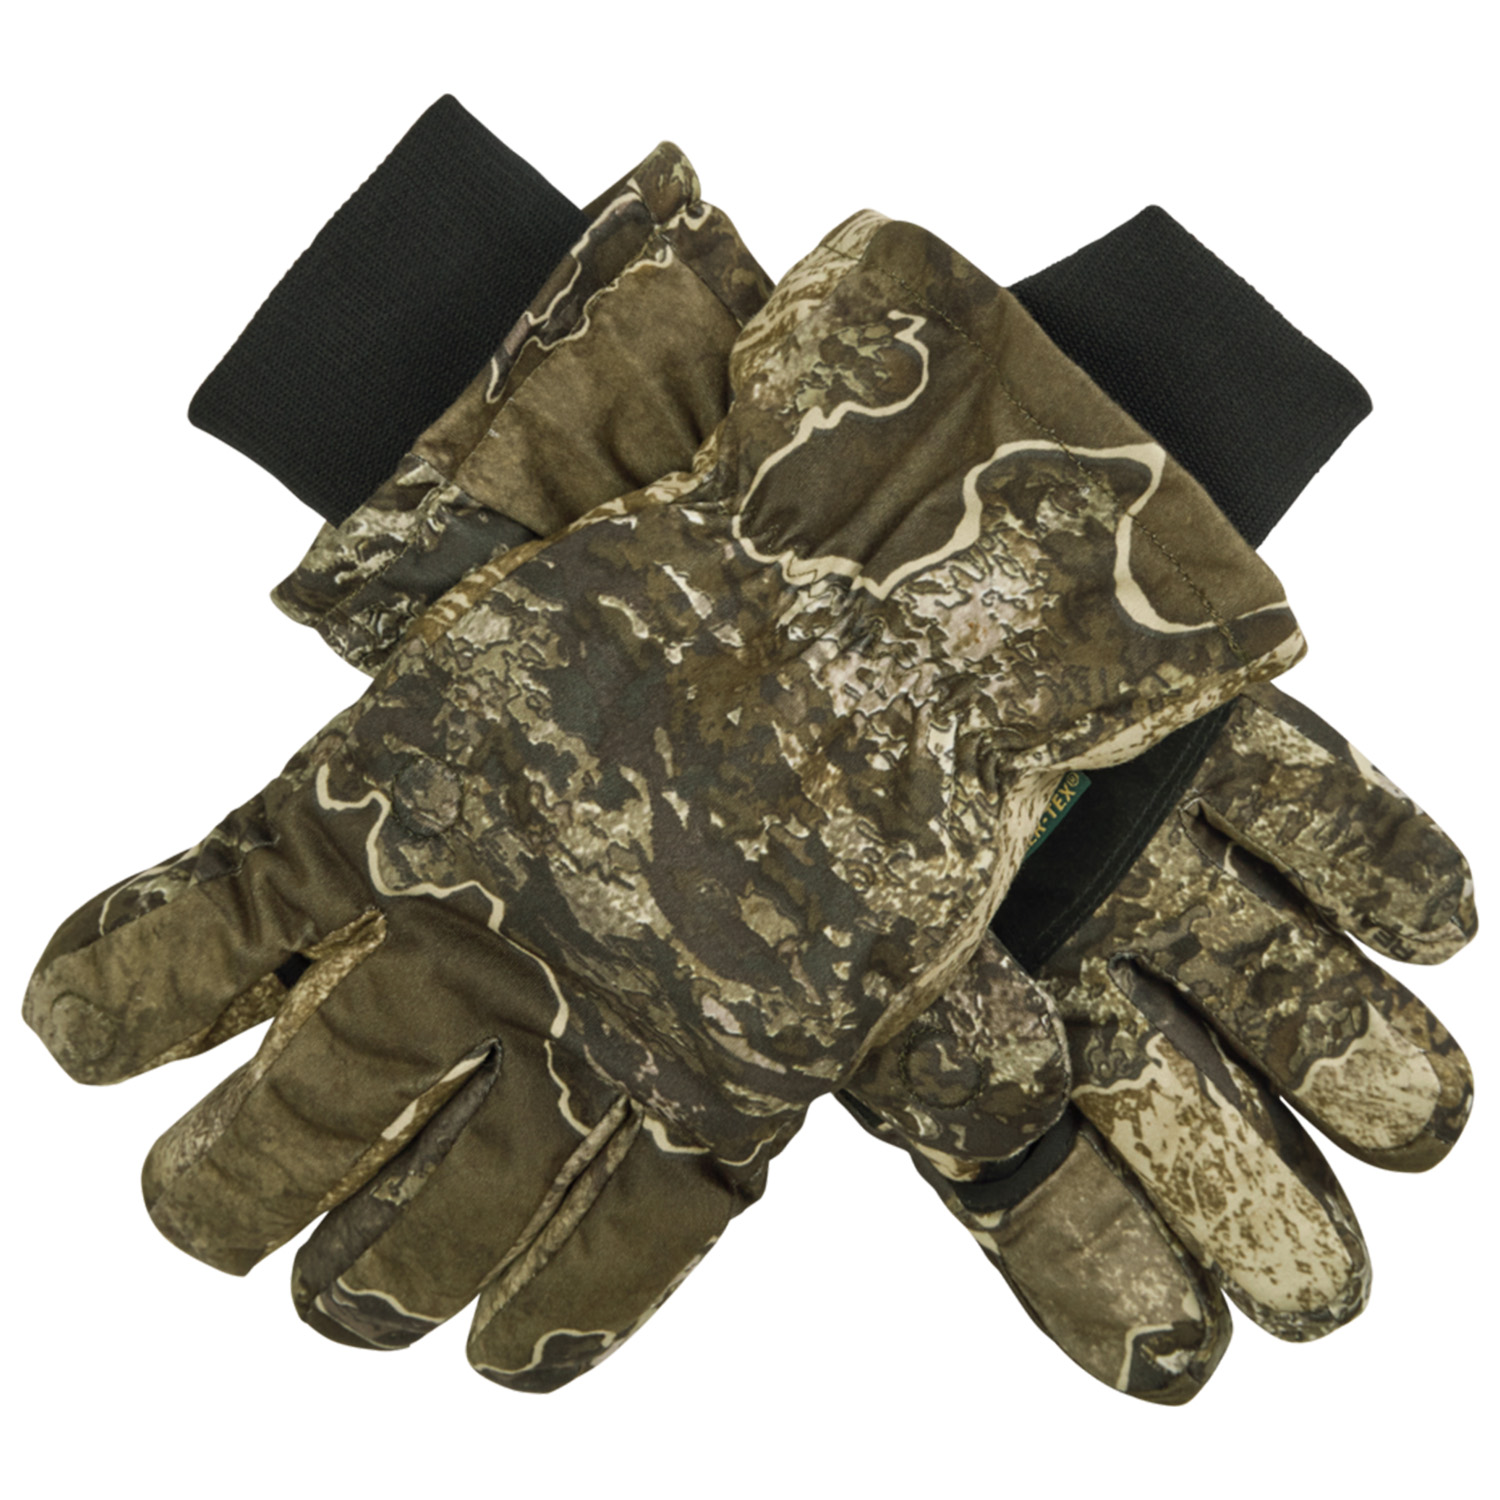 Deerhunte Winter Gloves Excape (realtree) - Camouflage Gloves